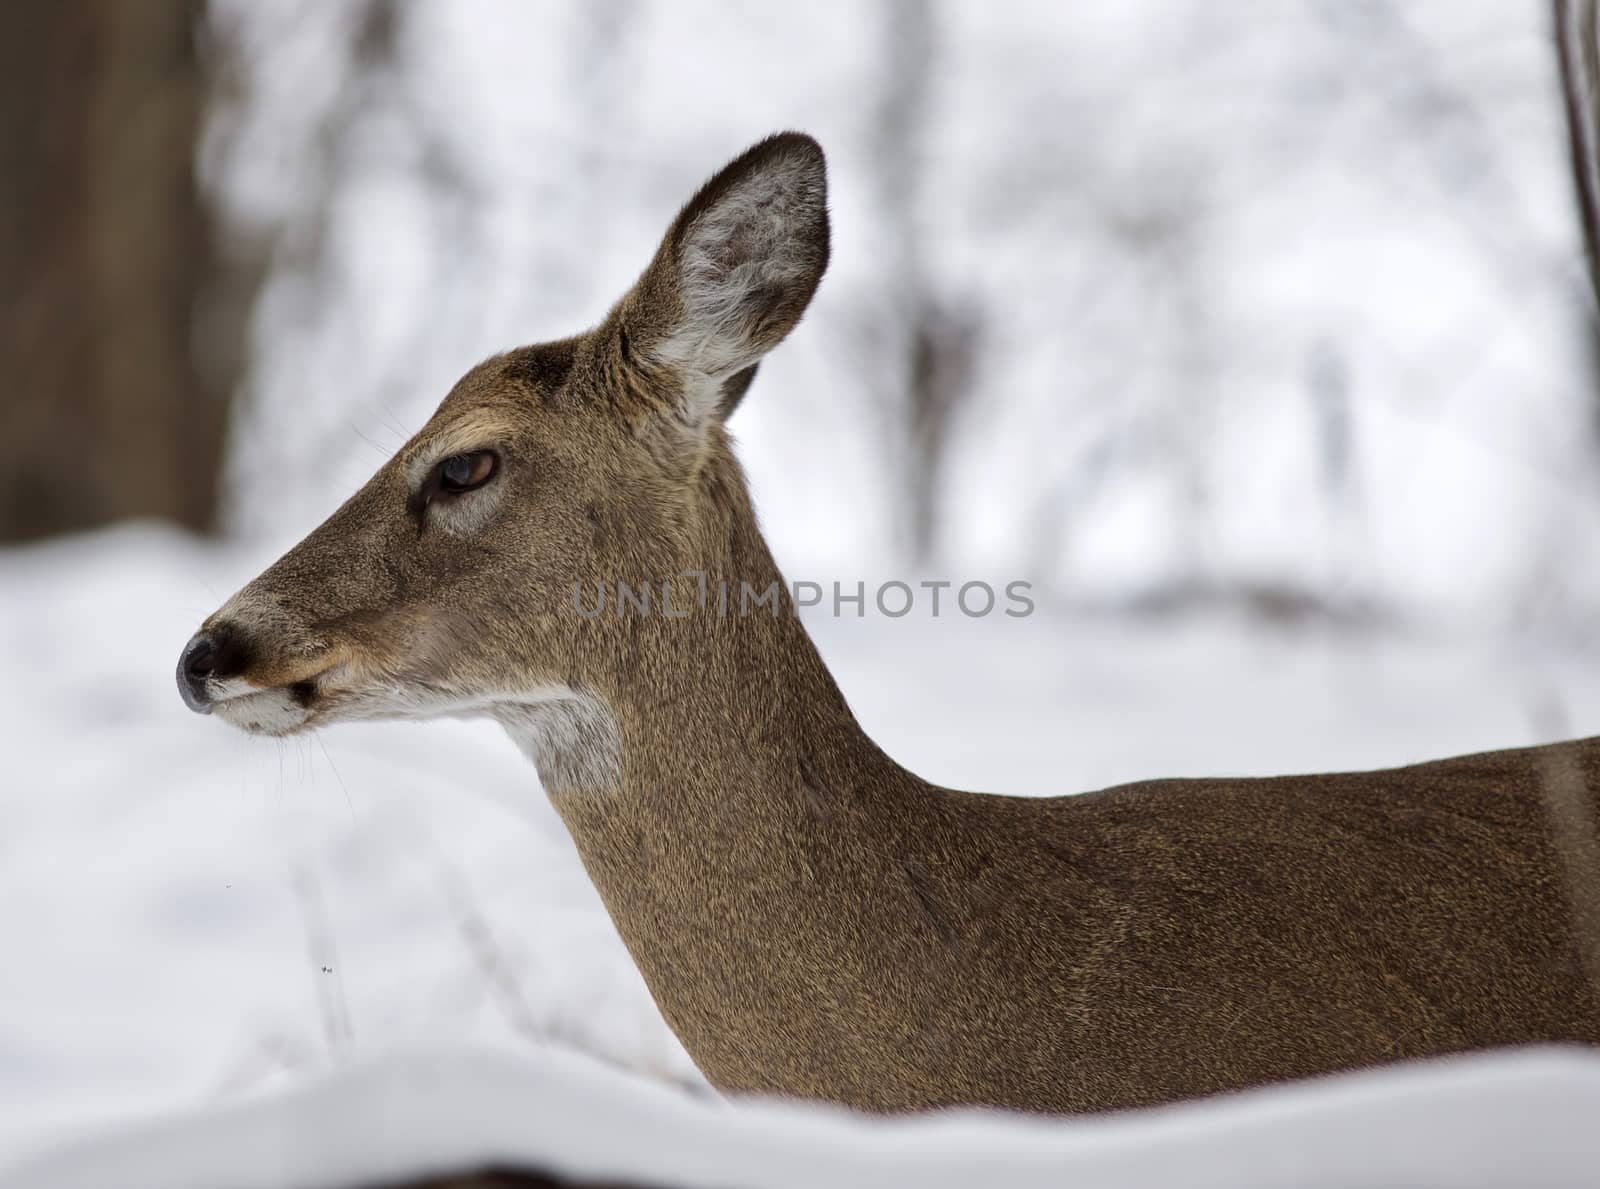 Beautiful isolated photo with a wild deer in the snowy forest